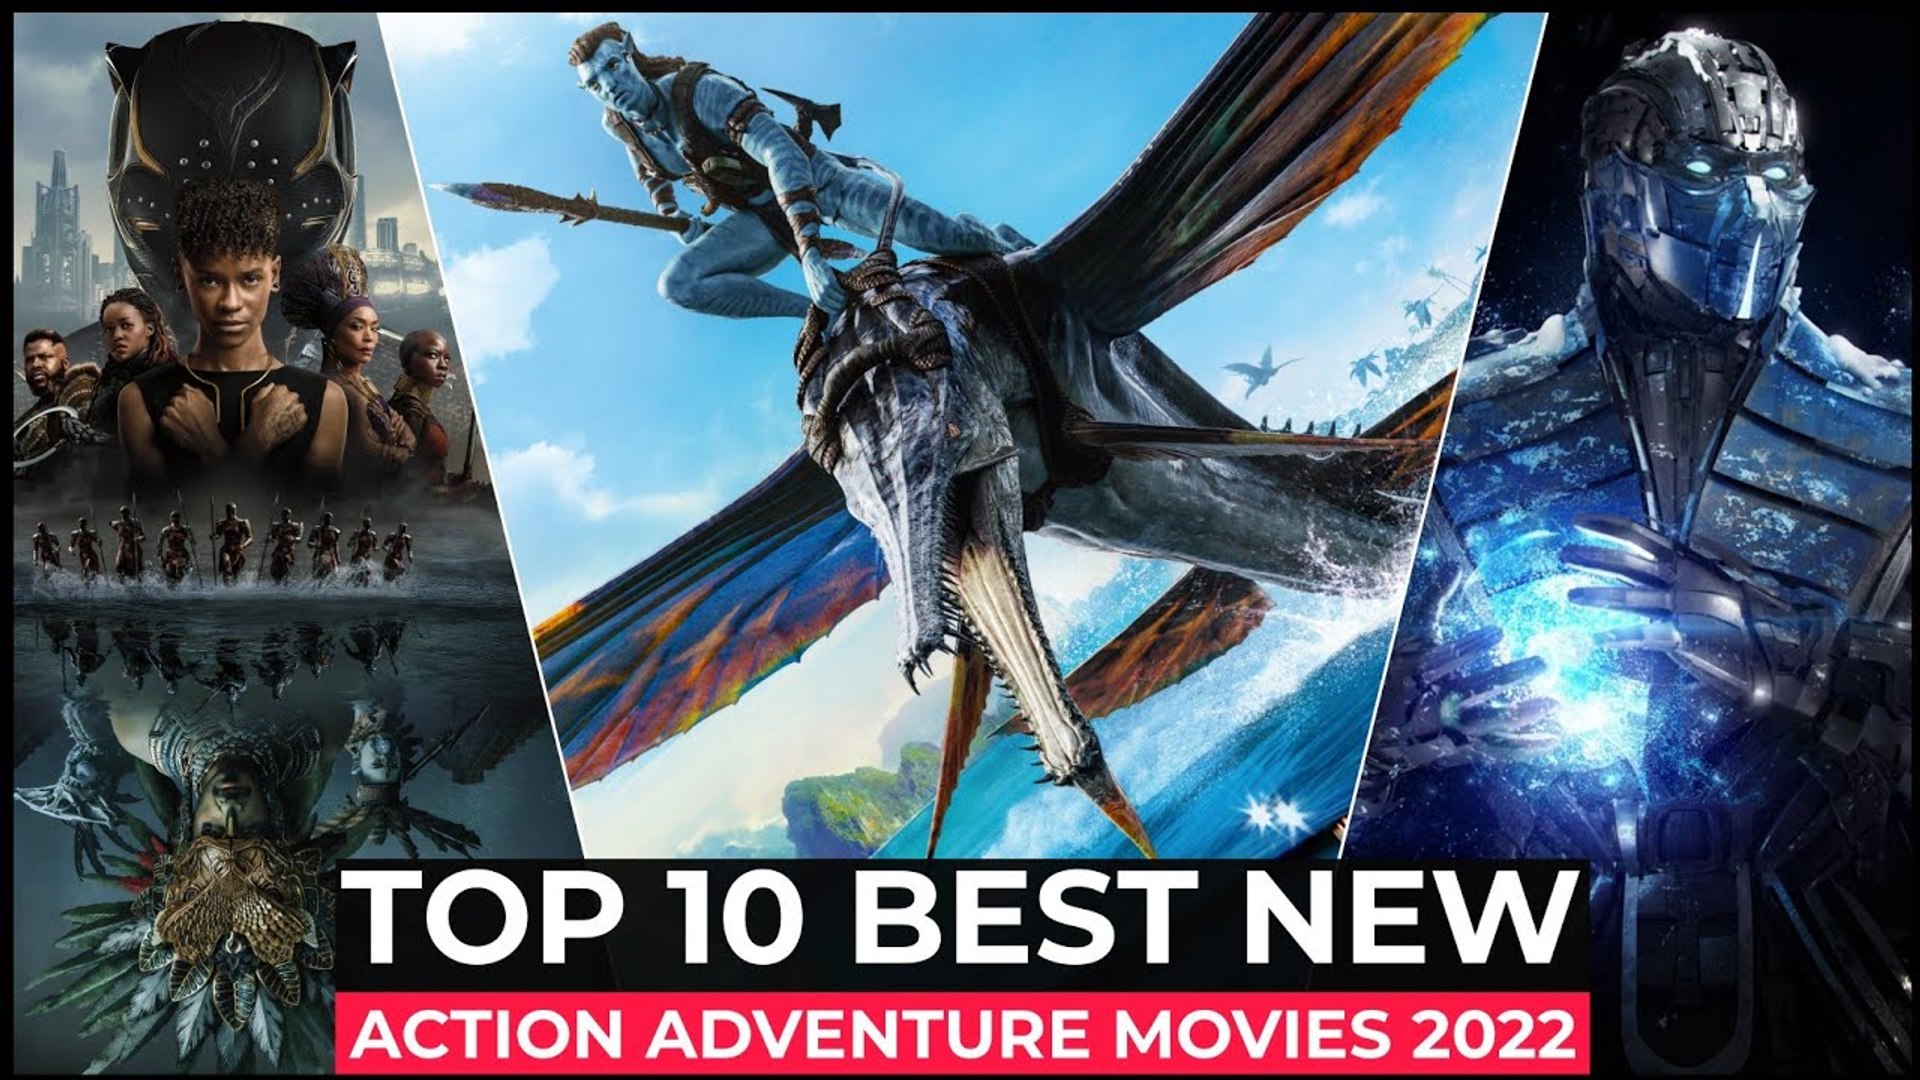 Top 10 Best Action Adventure Movies Of 2022 | New Hollywood Action Movies  Released in 2022 - video Dailymotion